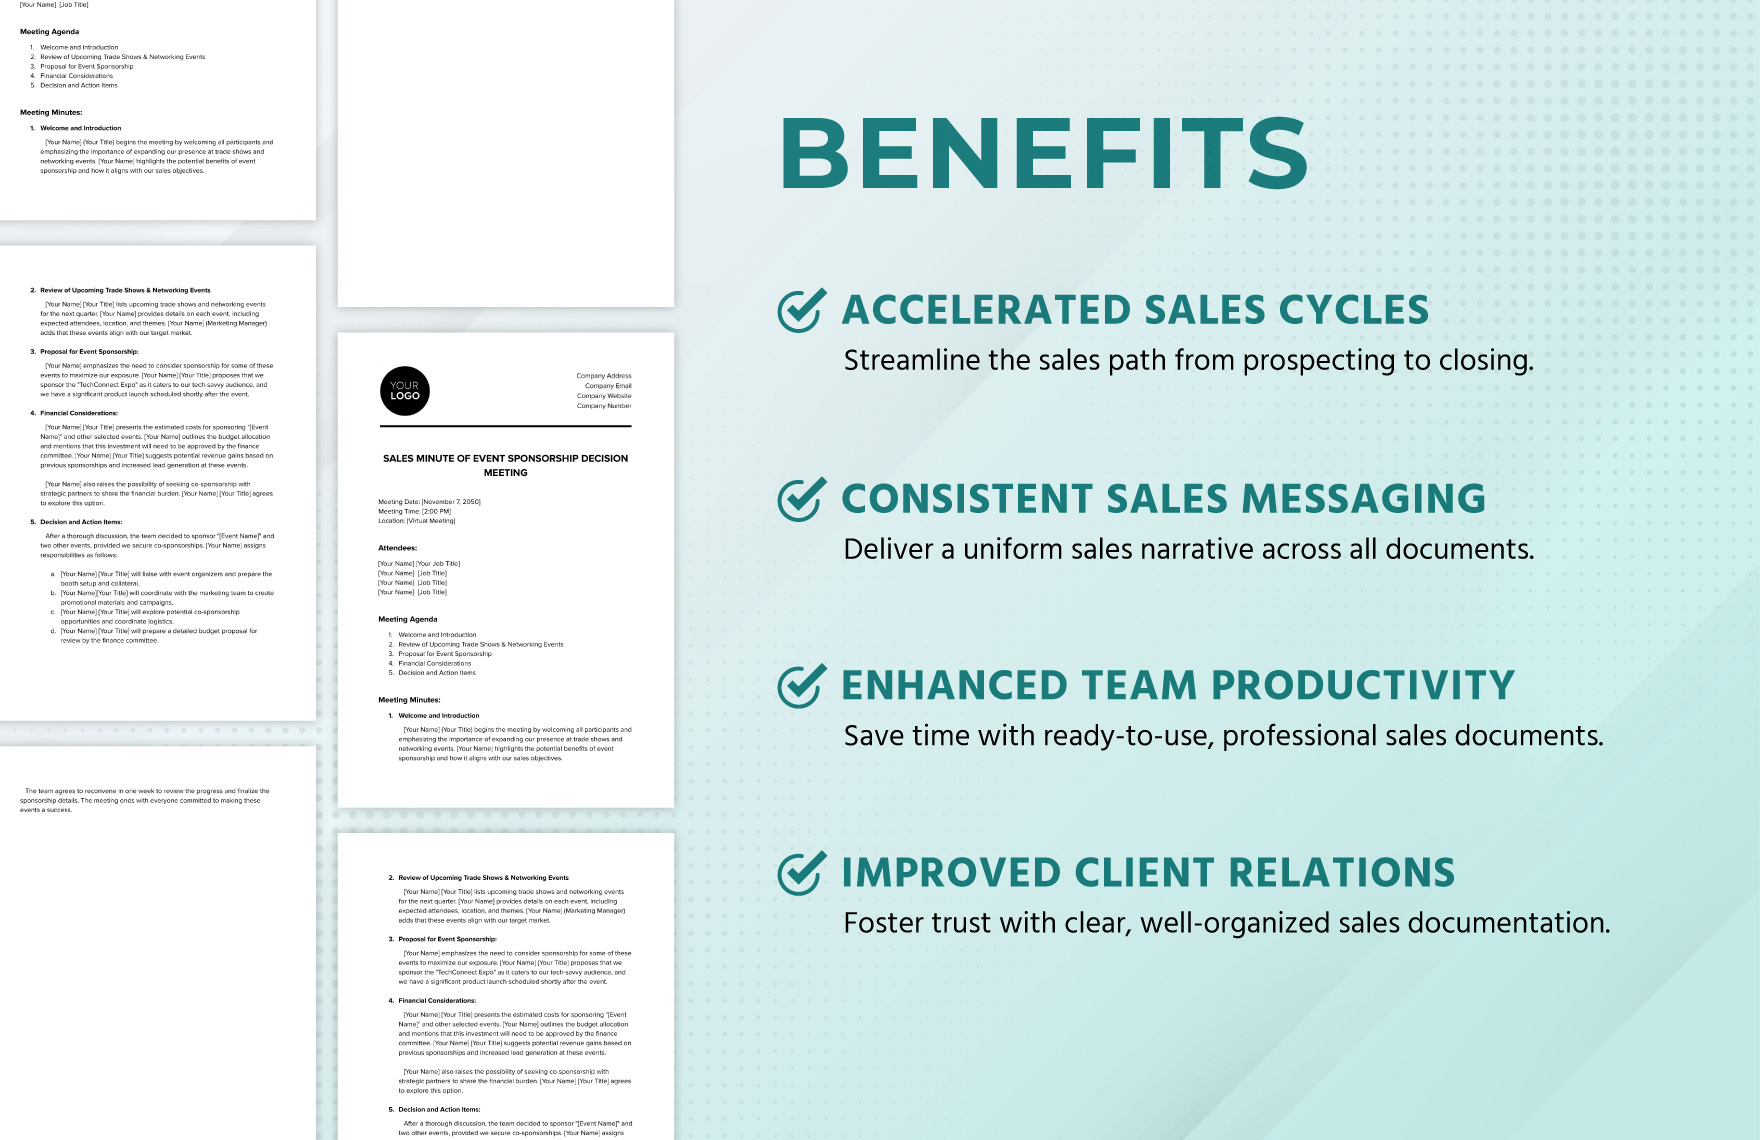 Sales Minute of Event Sponsorship Decision Meeting Template